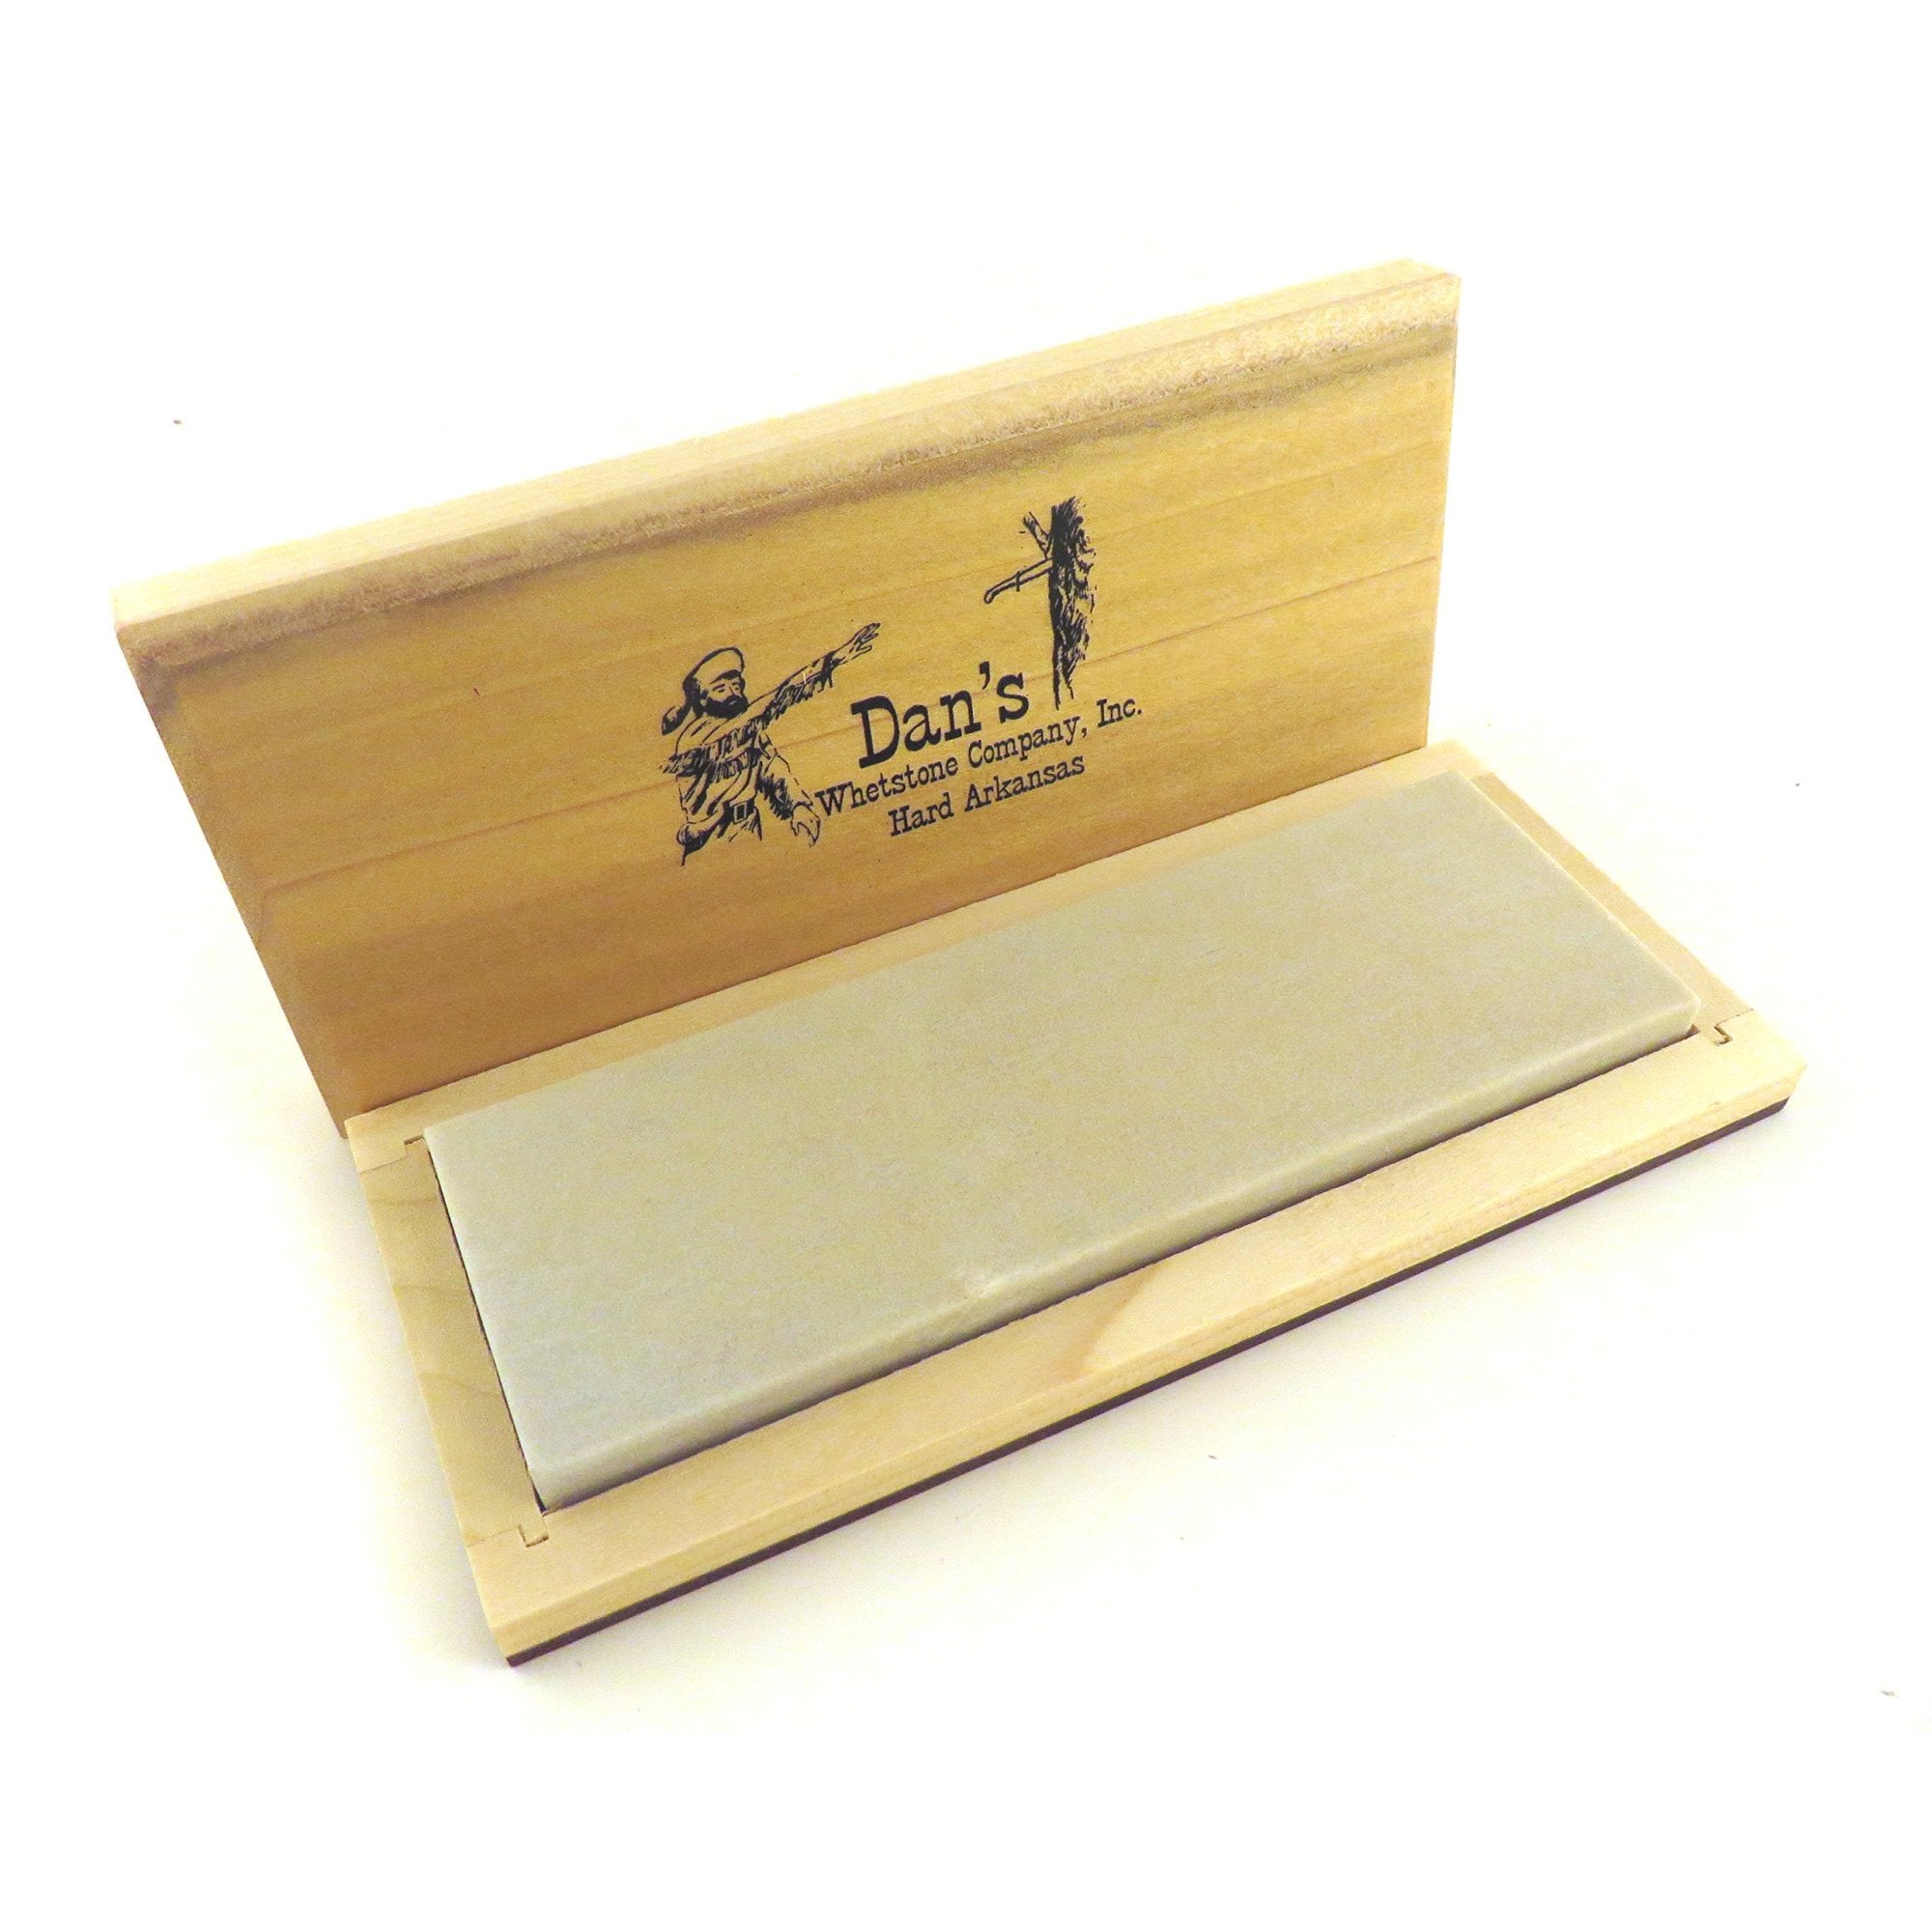 Buy Genuine Arkansas Hard (Fine) Knife Sharpening Bench Stone Whetstone 6  x 2 x 1/2 in Wood Box FAB-62-C at Prime Tools for only $ 30.99